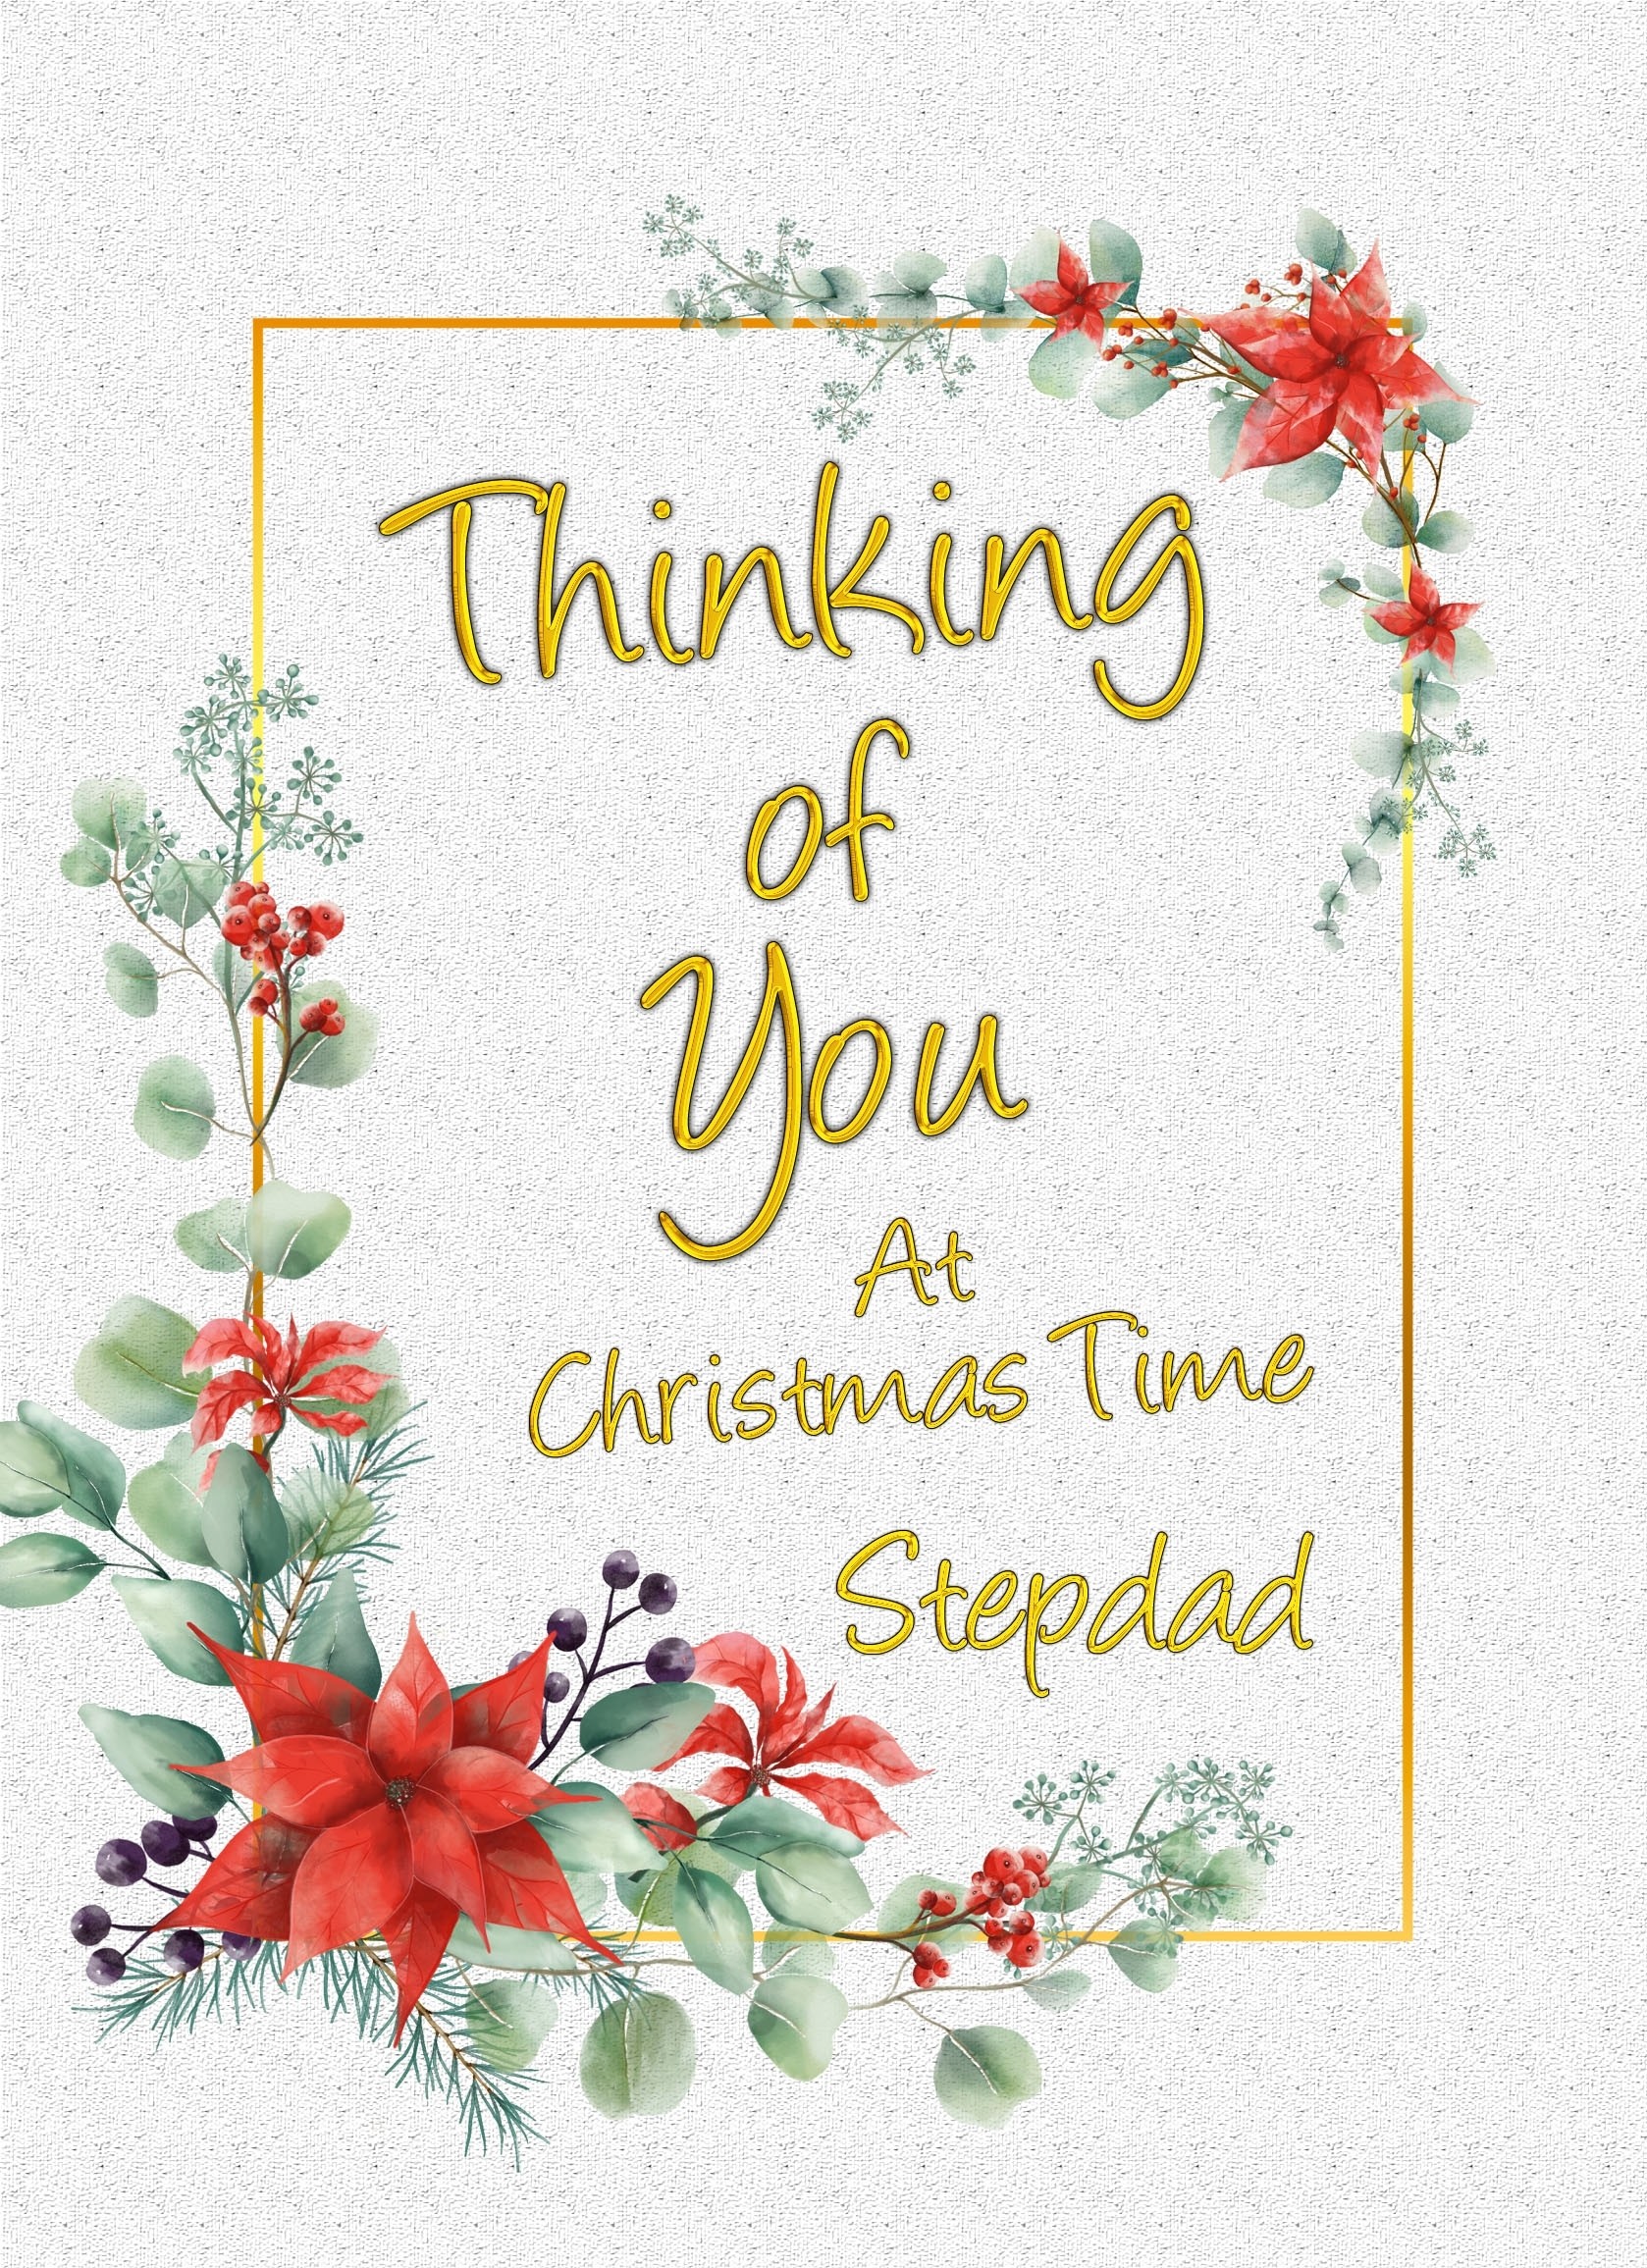 Thinking of You at Christmas Card For Stepdad